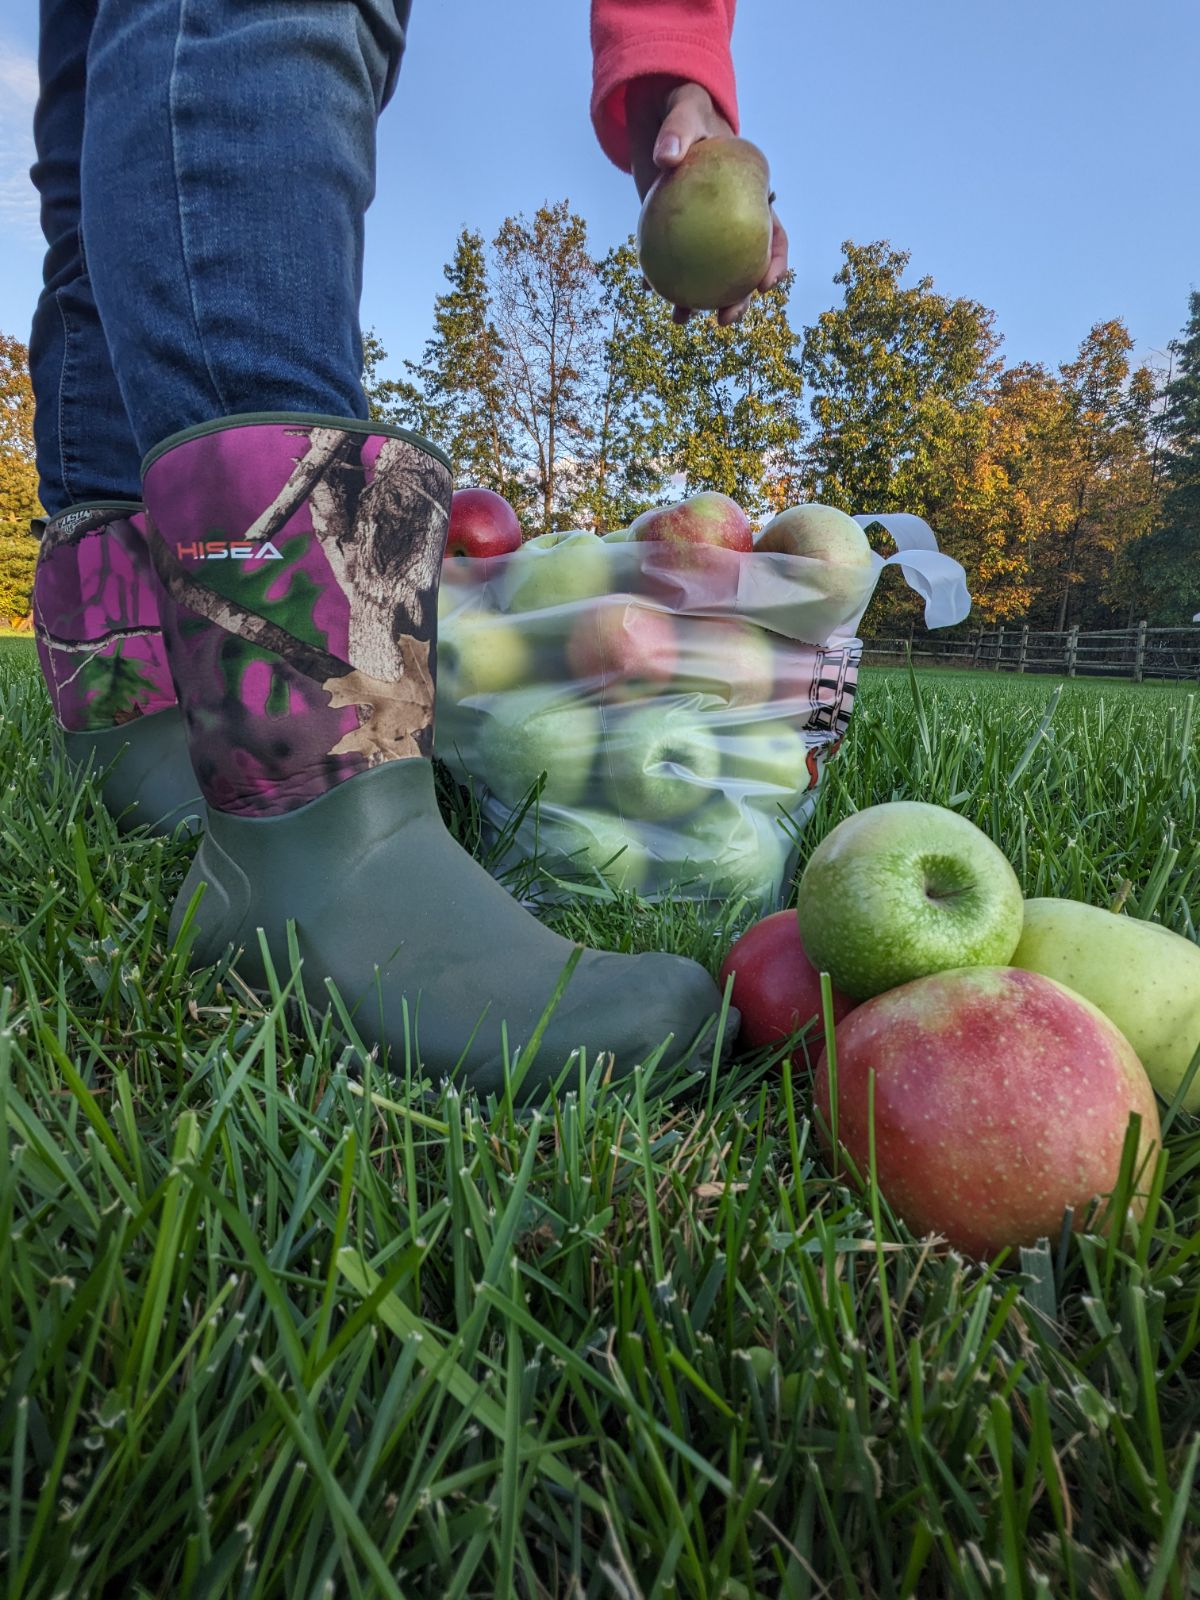 Picking apples wearing jeans and boots